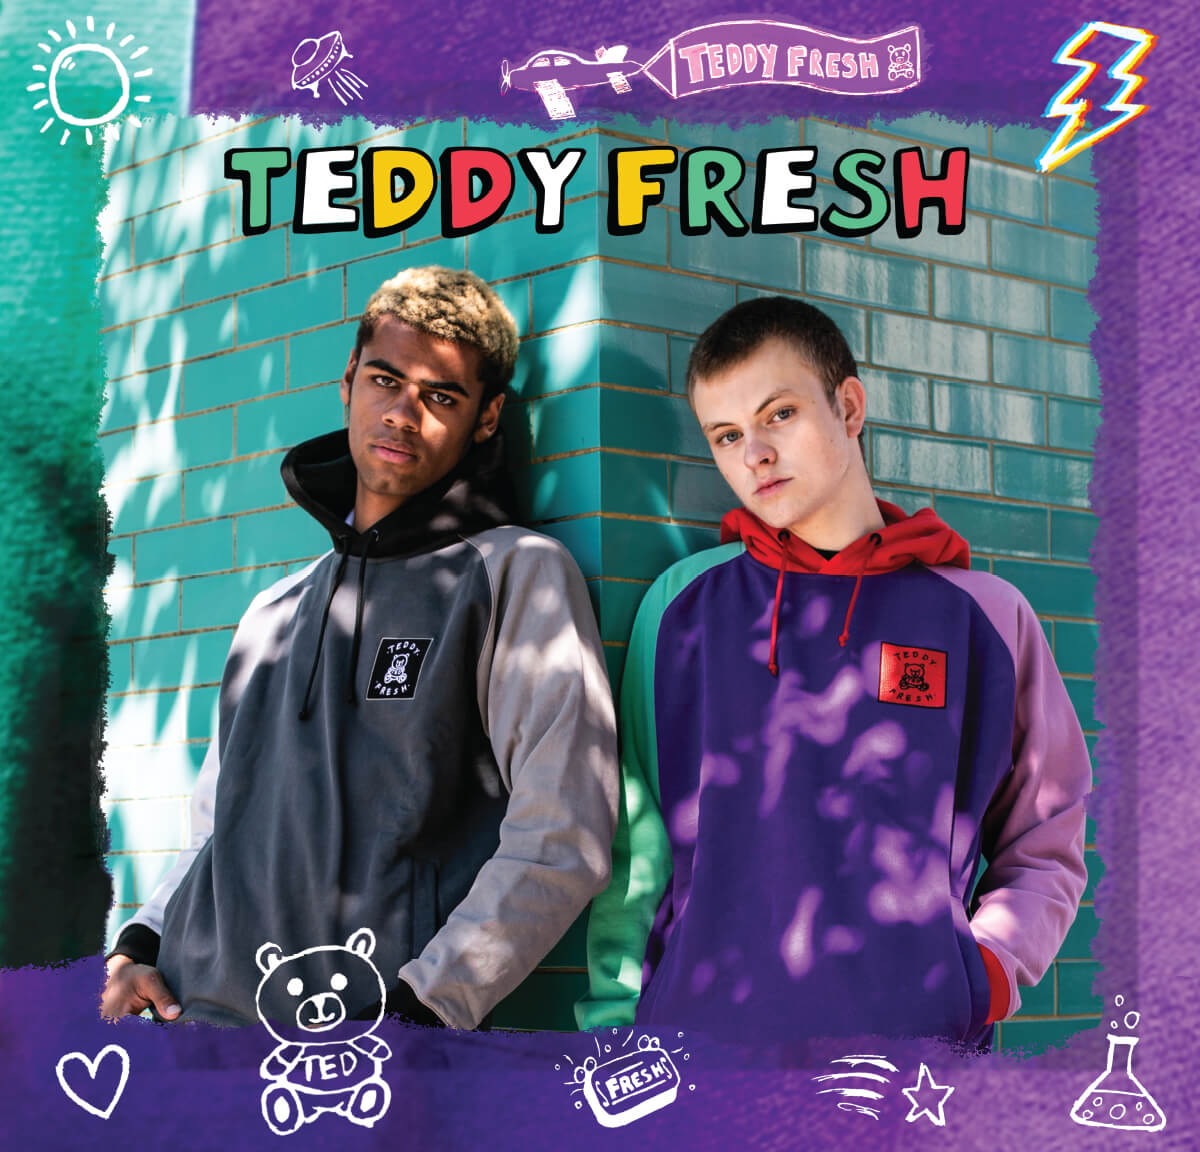 GIVE THE FRESHEST GIFTS THIS SEASON - SHOP TEDDY FRESH